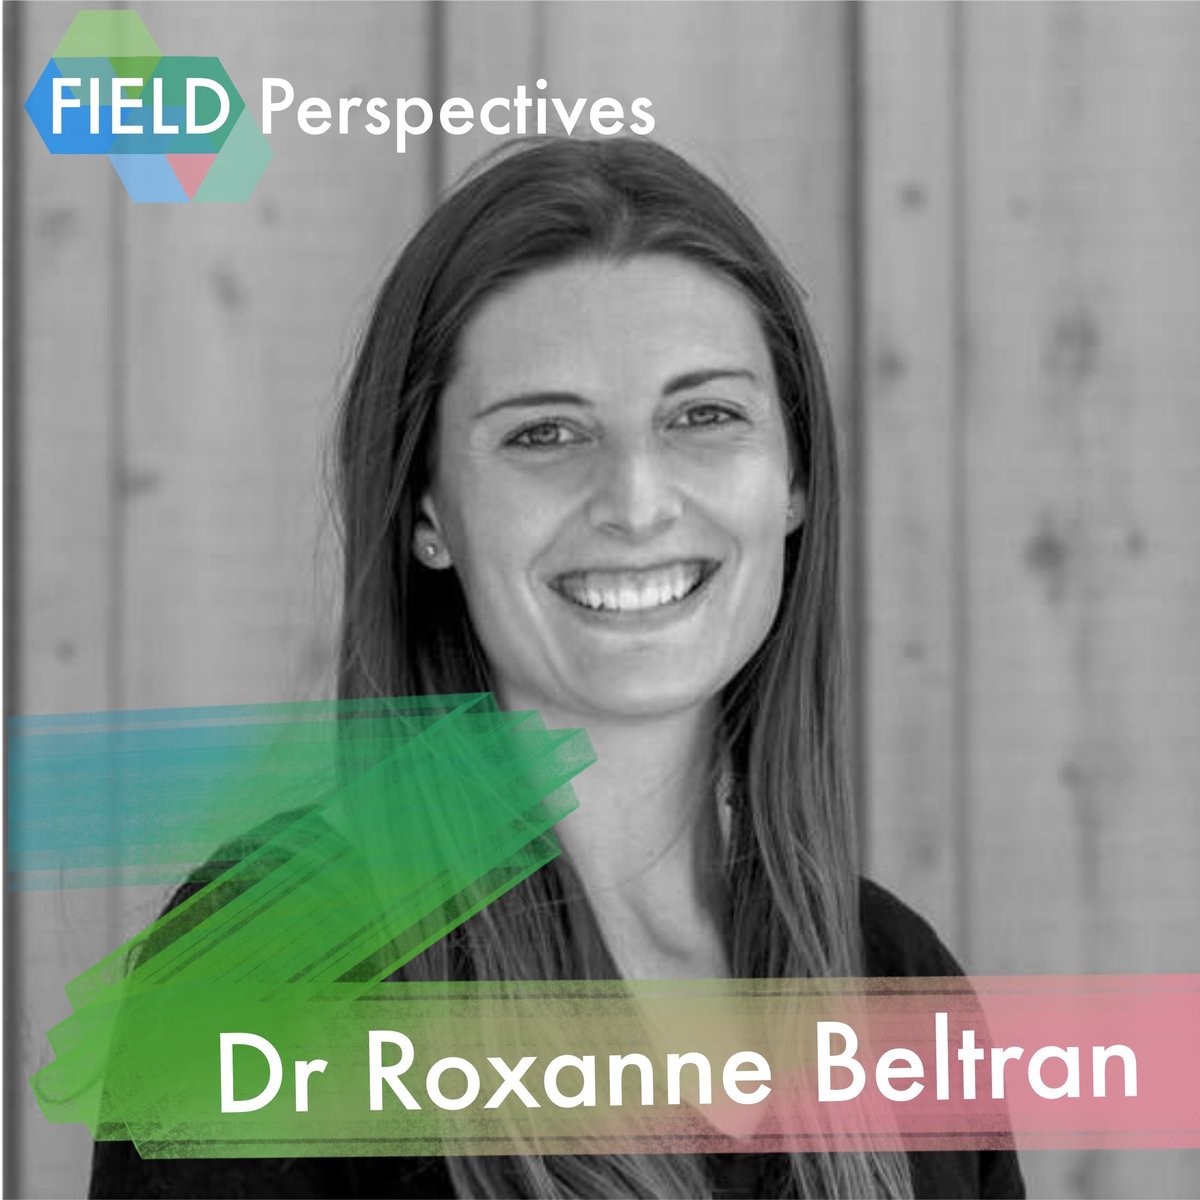 Outlook on recontextualising identity with fieldwork by @roxannesbeltran🌳⛺️ ➡️fieldperspectives.org/RoxanneBeltran… 'There are many barriers to taking field courses that we might not recognize if they don’t apply to us. Creating a field course for all students means removing these barriers.'